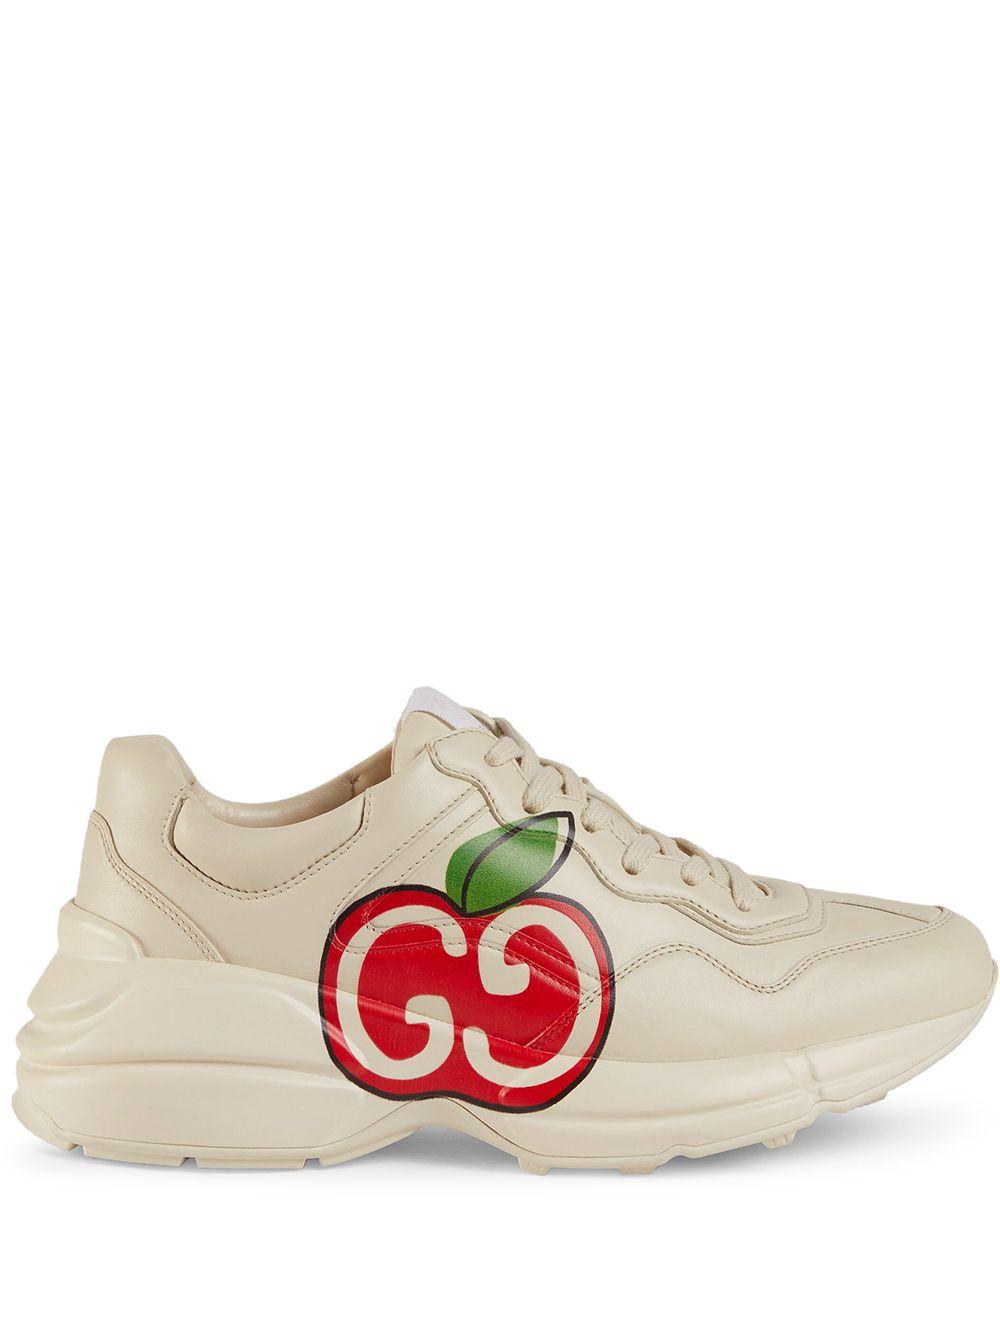 Gucci Leather Rhyton Apple Sneakers in Ivory (White) - Save 26% - Lyst